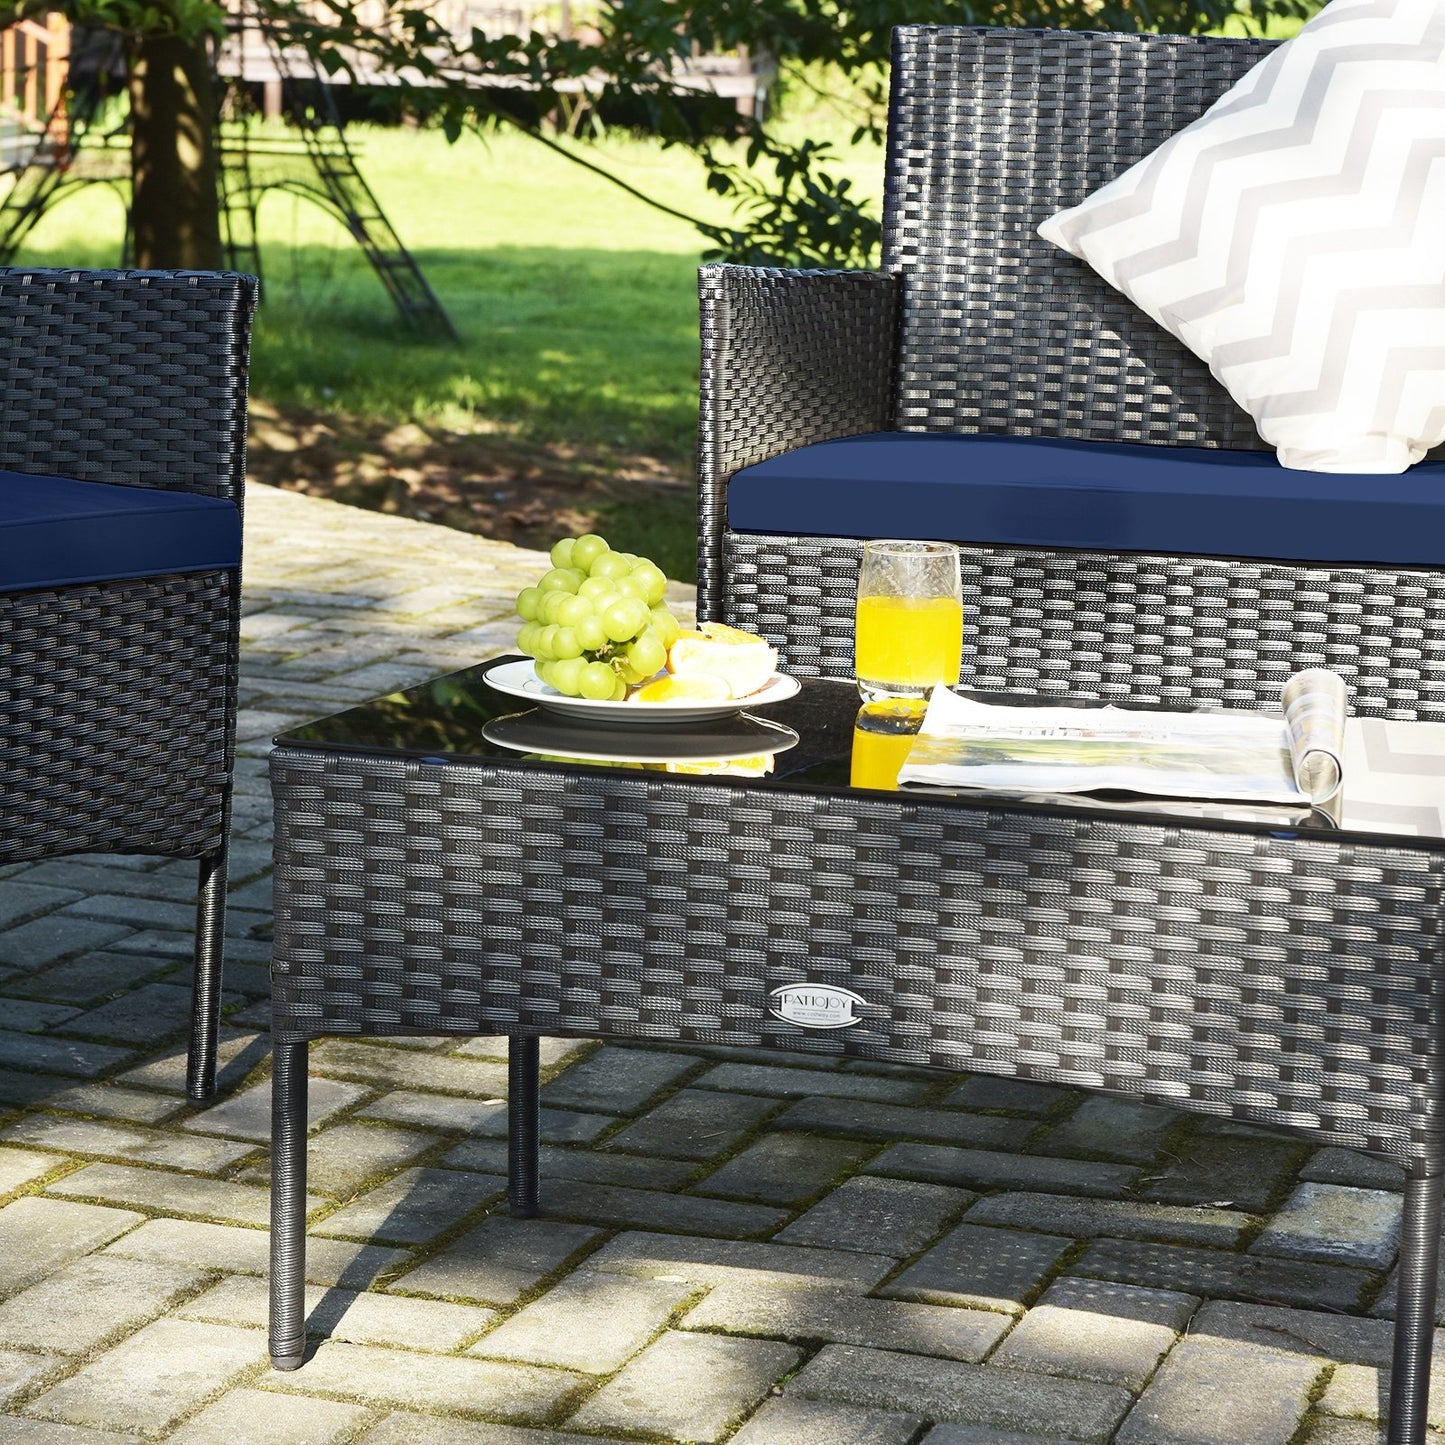 4 Pieces Patio Rattan Cushioned Sofa Set with Tempered Glass Coffee Table, Navy